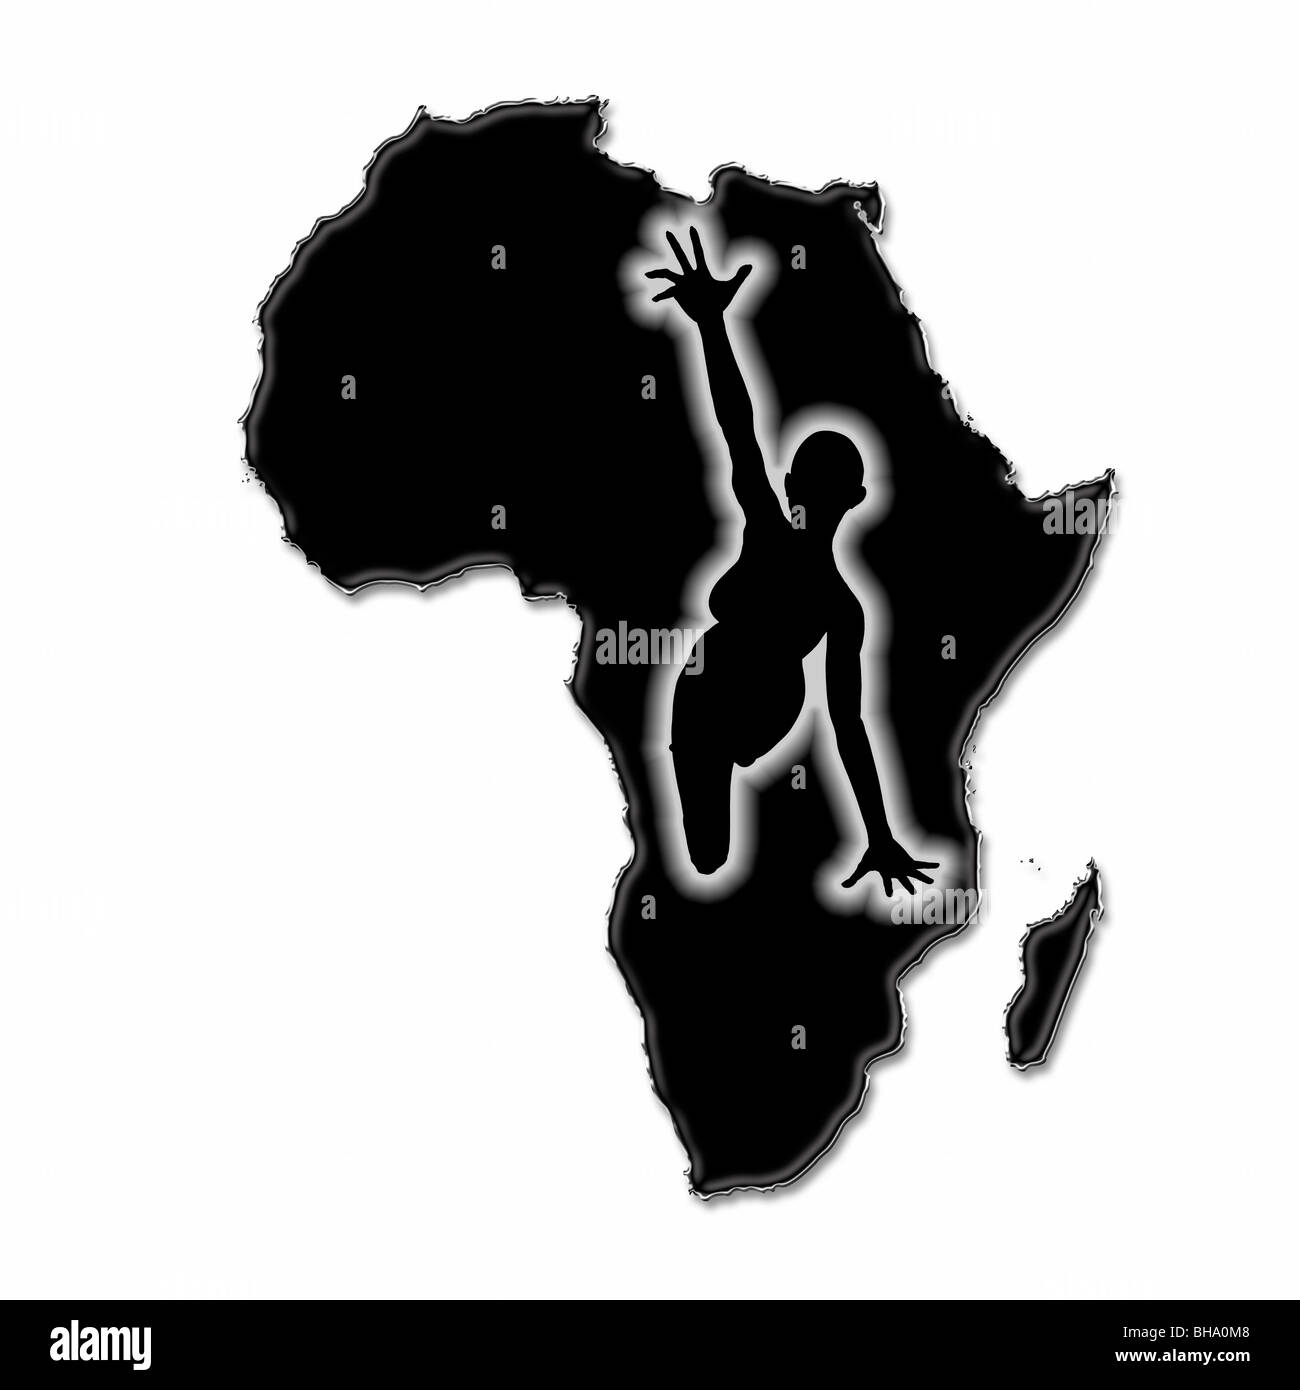 Illustration of a Woman reaching out for help on a map of Africa. Conceptual image of Starvation, Hunger and Despair in Africa Stock Photo